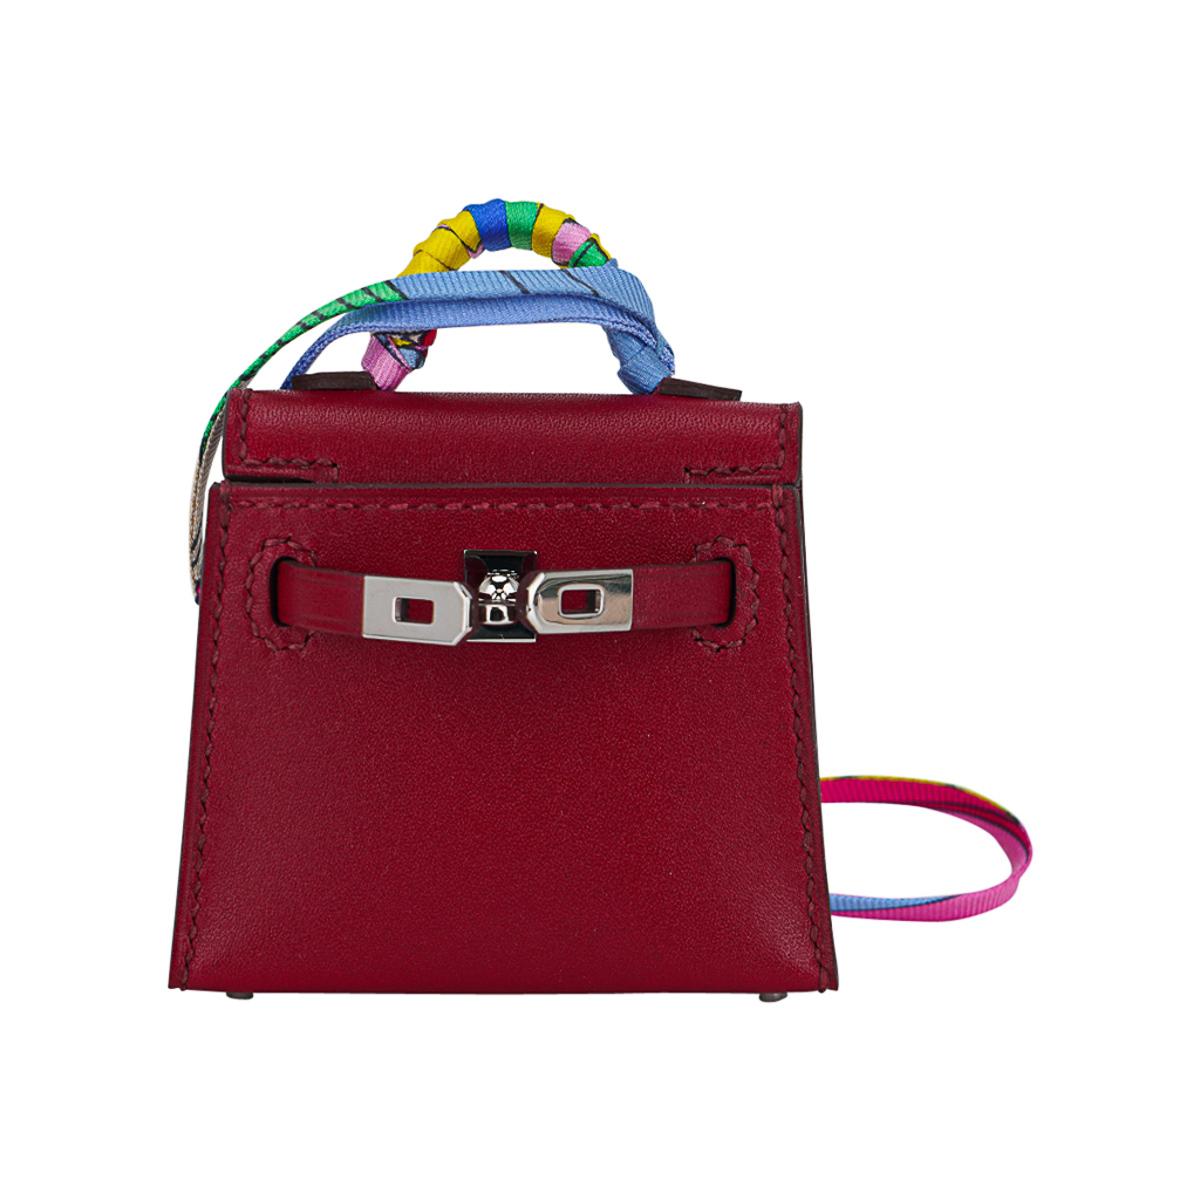 Hermes Kelly Twilly Bag Charm Rubis Palladium Tadelakt Leather Limited Edition In New Condition For Sale In Miami, FL